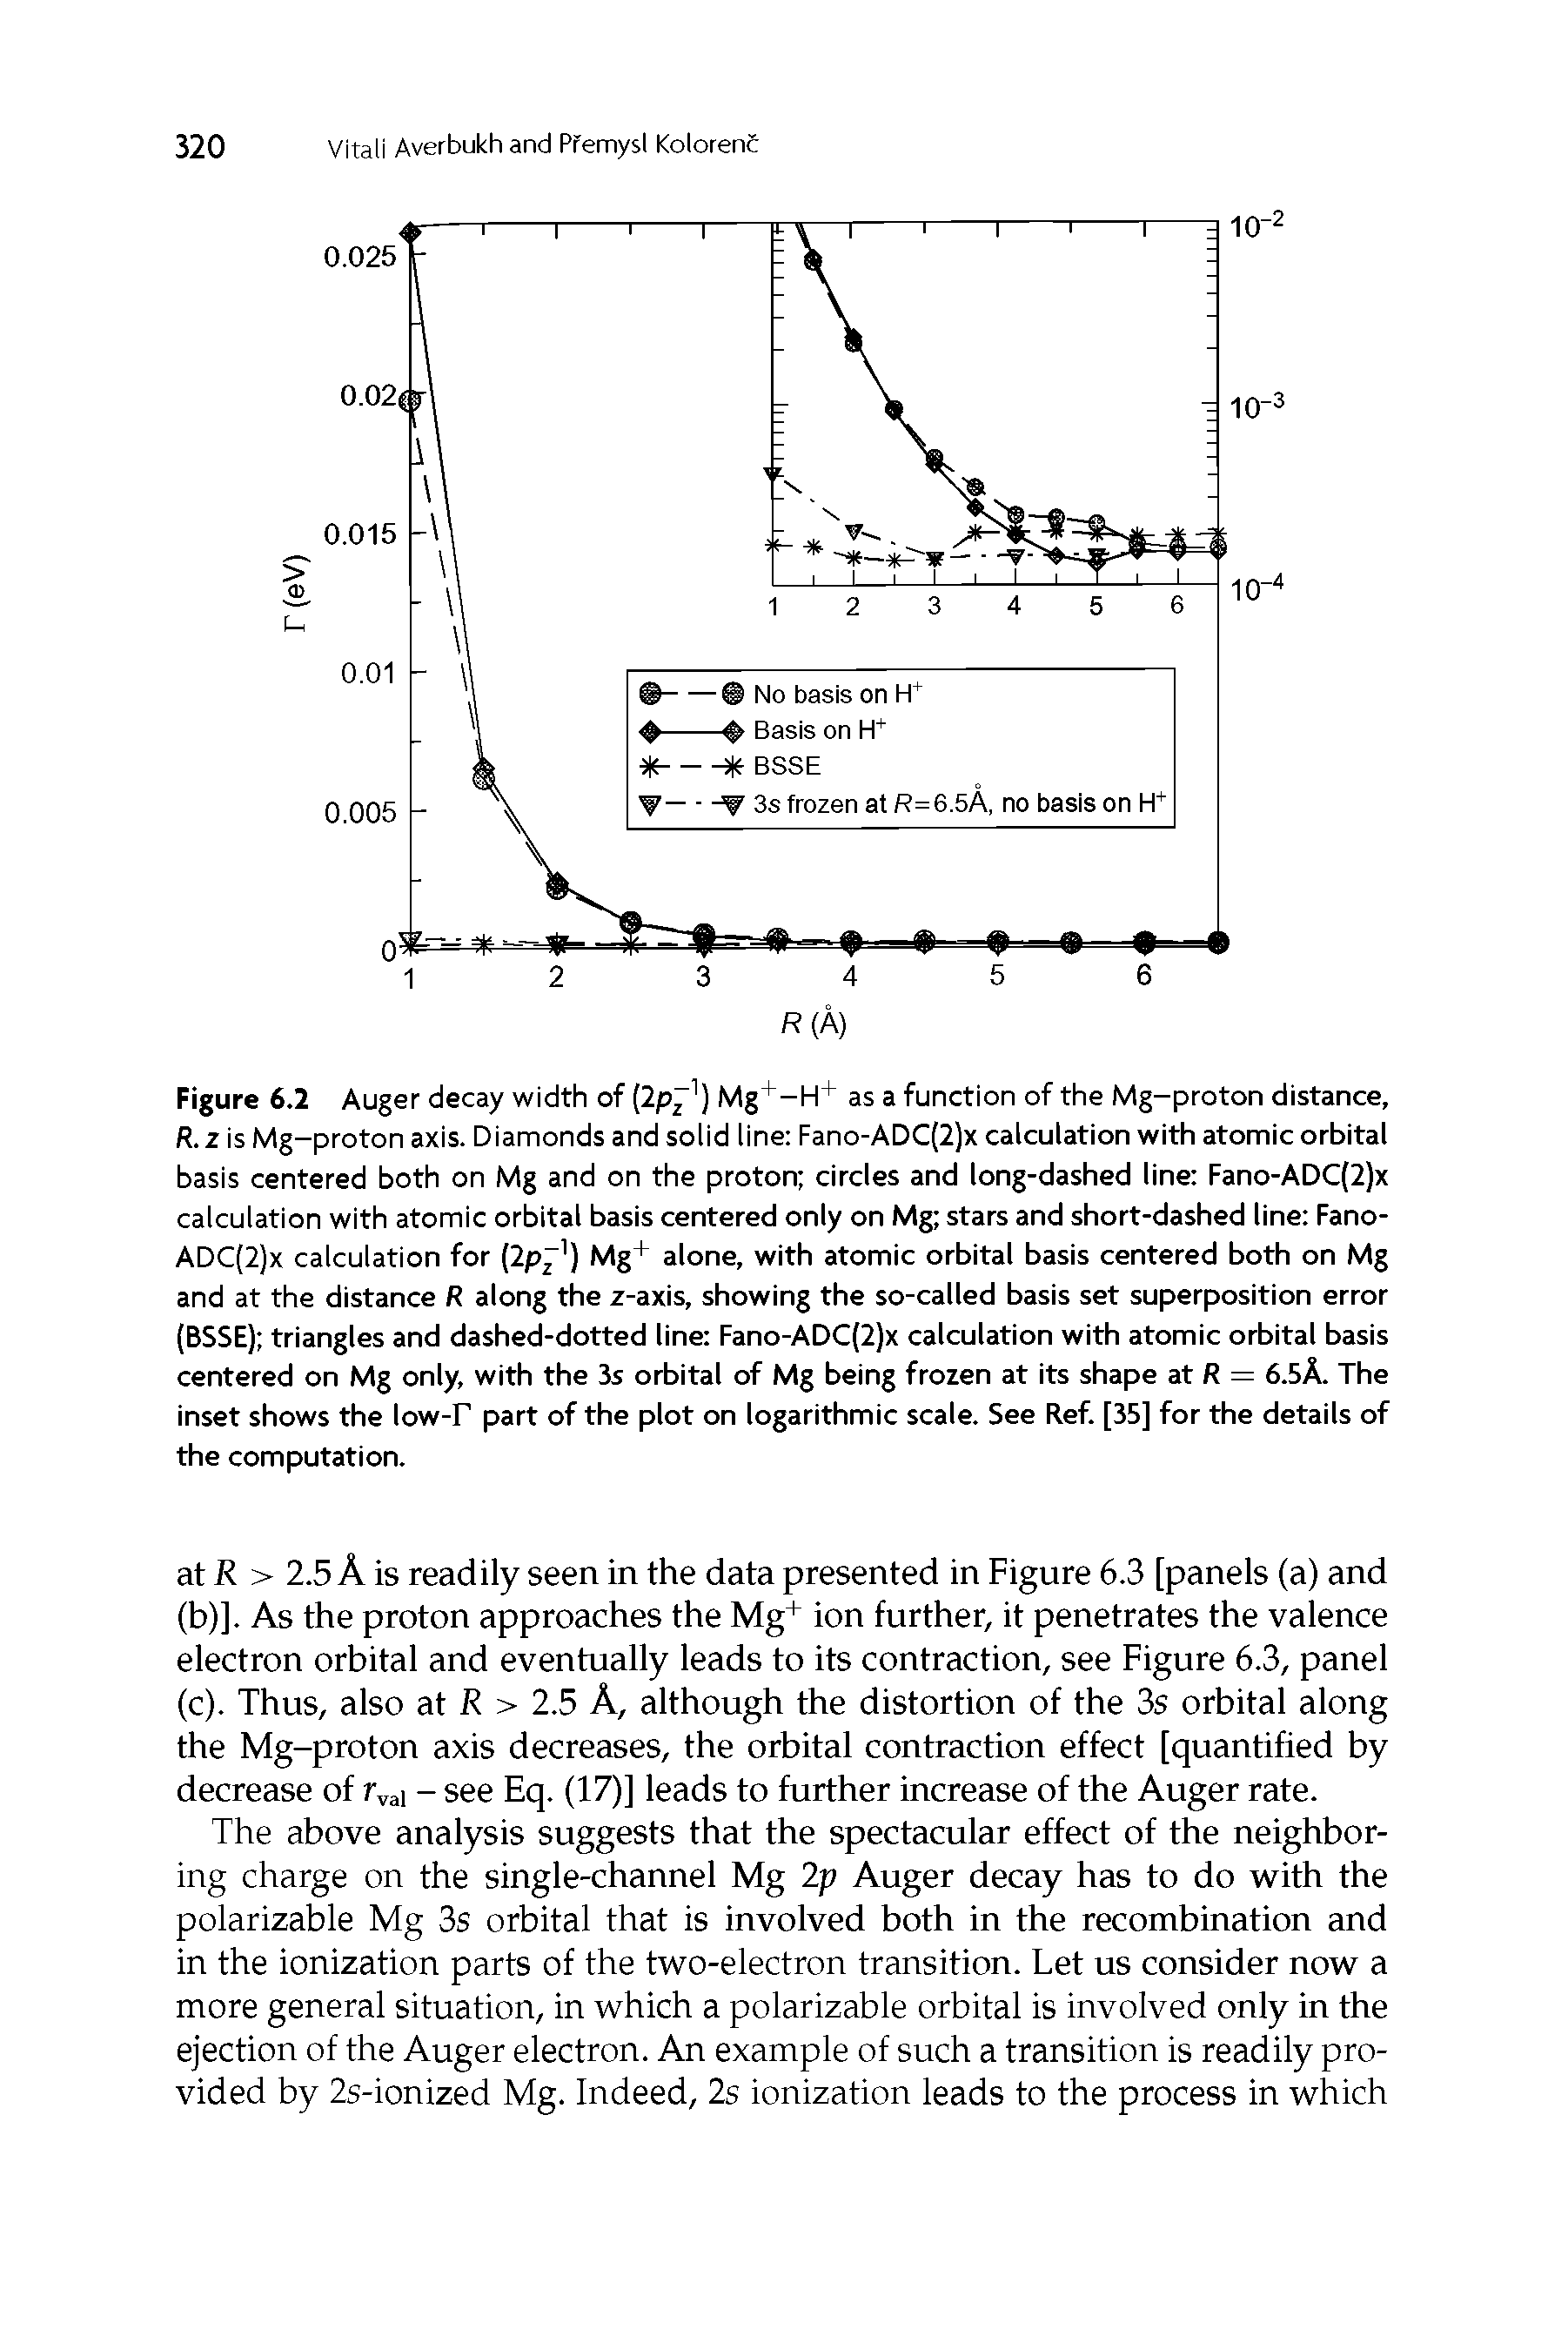 Figure 6.2 Auger decay width of (2p n) Mg+-H+ as a function of the Mg-proton distance, R.z is Mg-proton axis. Diamonds and solid line Fano-ADC(2)x calculation with atomic orbital basis centered both on Mg and on the proton circles and long-dashed line Fano-ADC(2)x calculation with atomic orbital basis centered only on Mg stars and short-dashed line Fano-ADC(2)x calculation for (2p 1) Mg+ alone, with atomic orbital basis centered both on Mg and at the distance R along the z-axis, showing the so-called basis set superposition error (BSSE) triangles and dashed-dotted line Fano-ADC(2)x calculation with atomic orbital basis centered on Mg only, with the 3s orbital of Mg being frozen at its shape at R = 6.5A. The inset shows the low-r part of the plot on logarithmic scale. See Ref. [35] for the details of the computation.